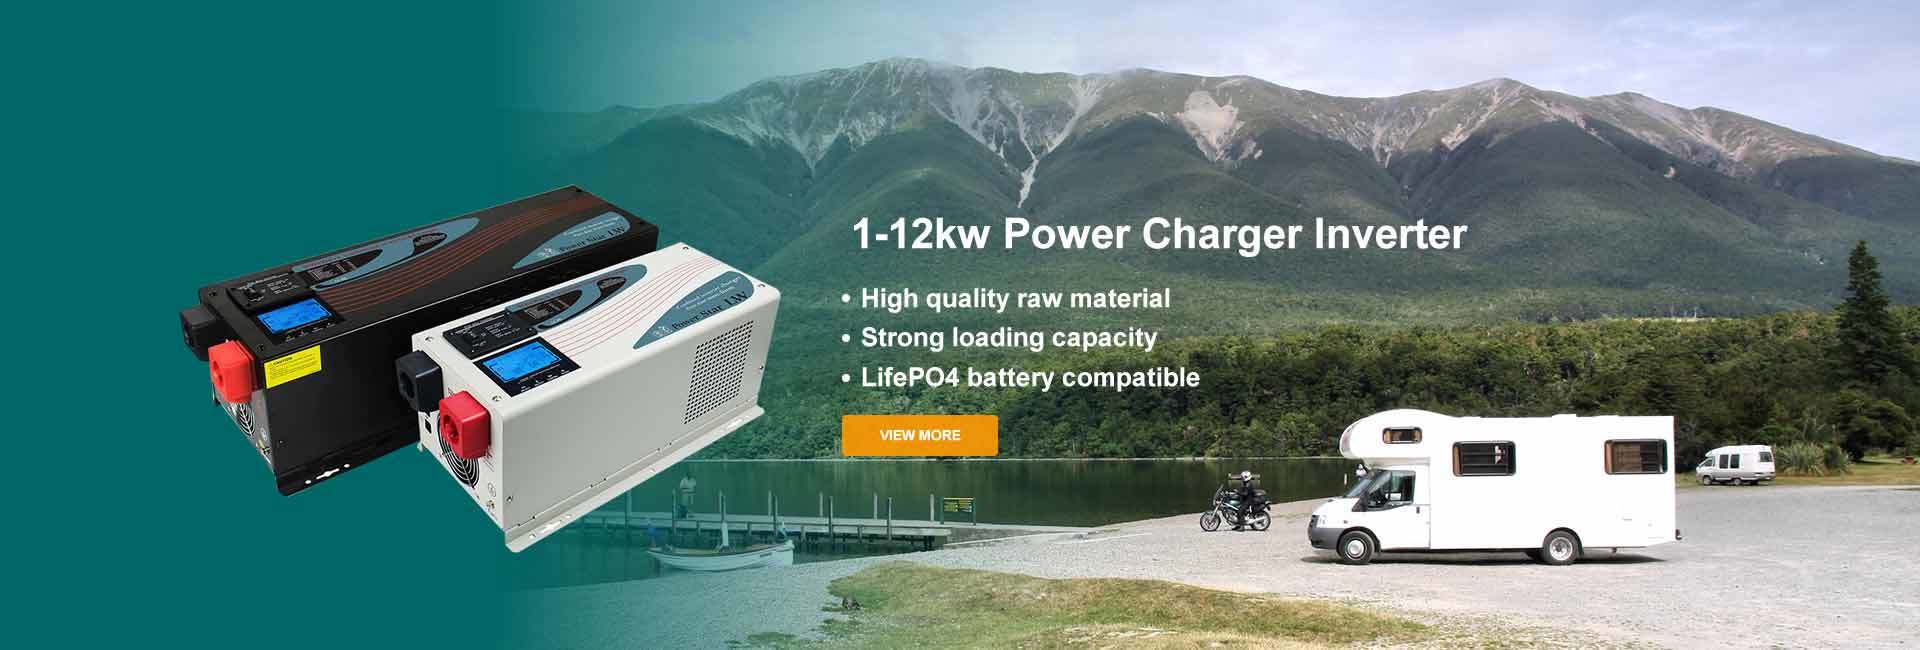 1-12kw Power Charger Inverter